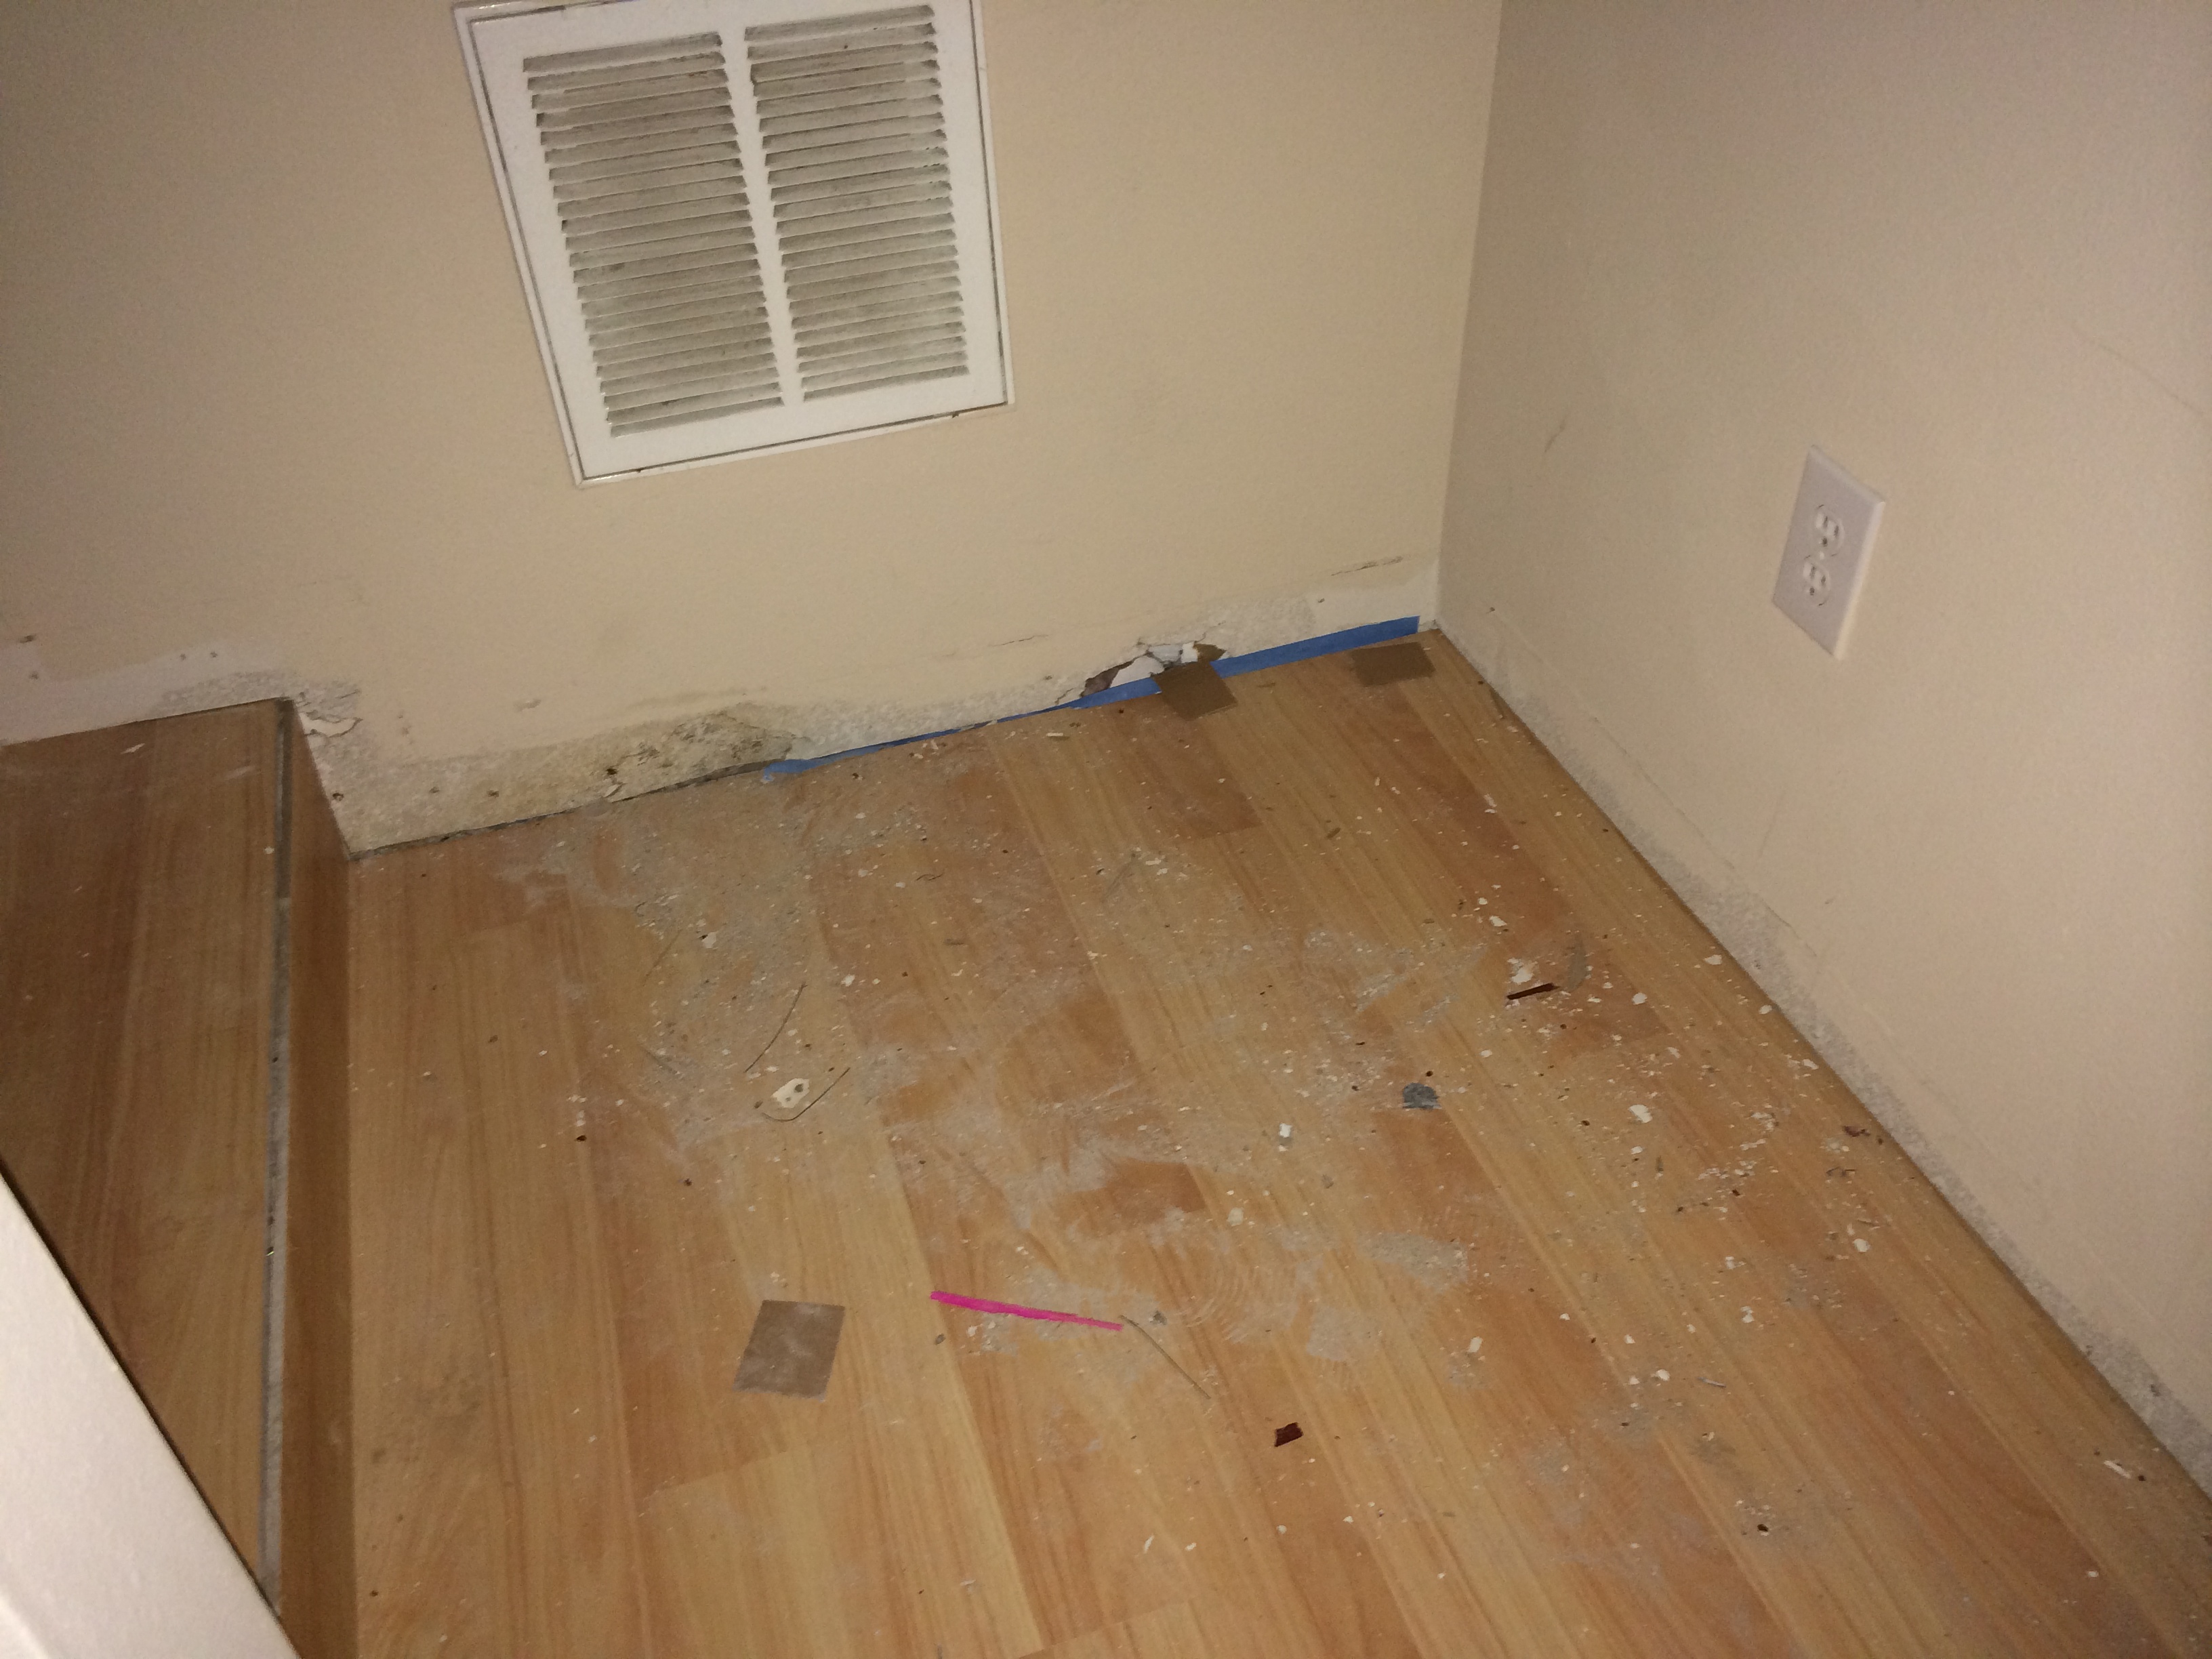 Finished baseboard, according to Norman Fitoria